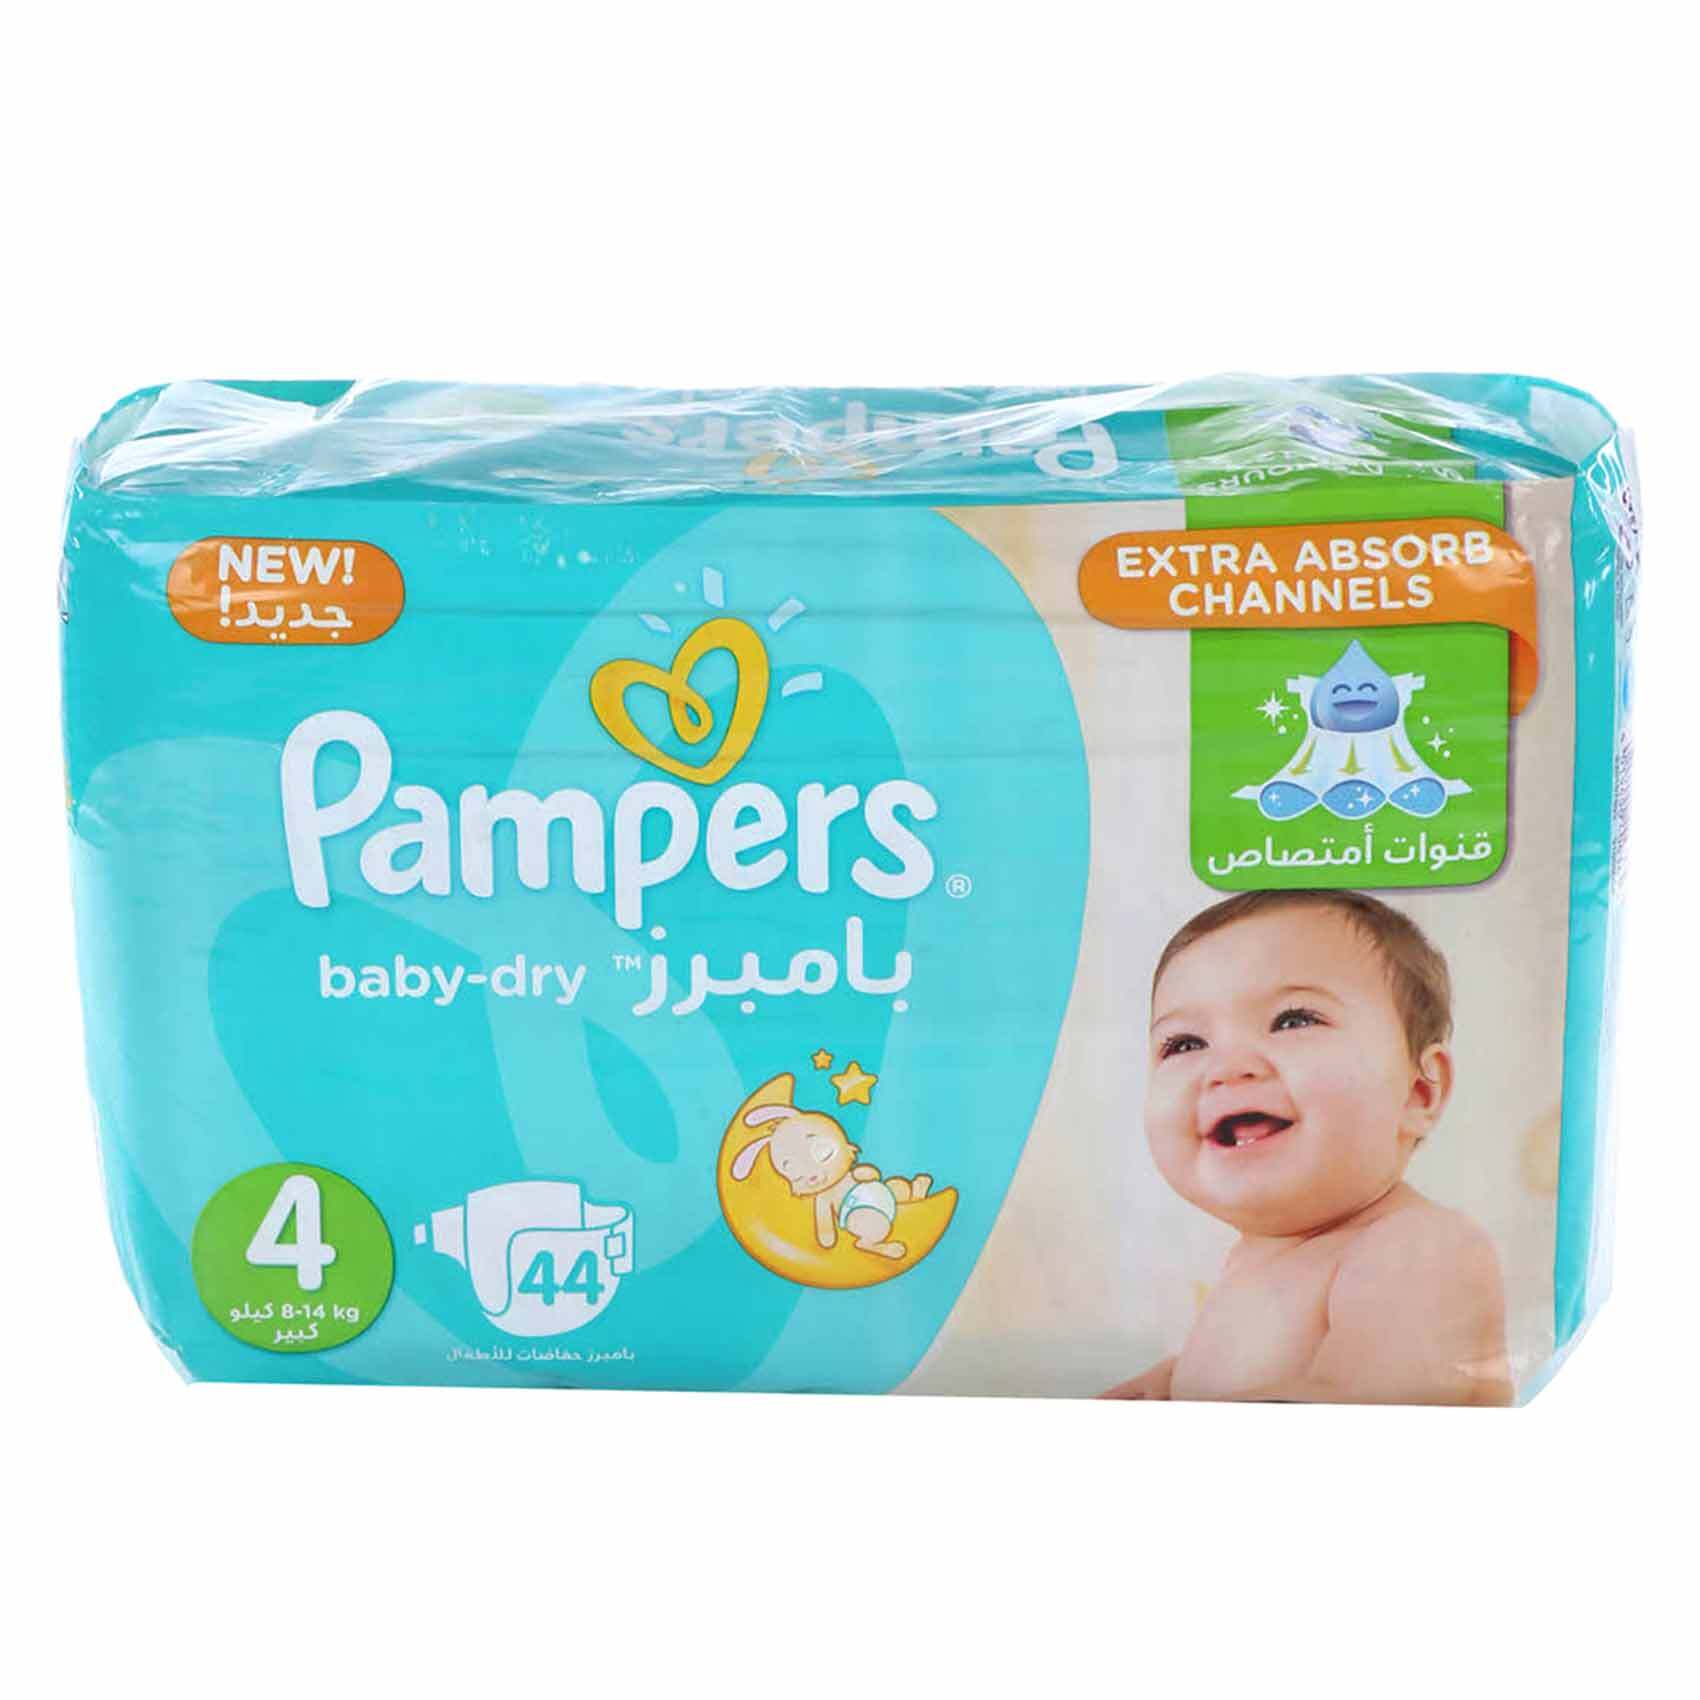 pampers baby-dry – taille 4 x 64 couches, 9-18 kg – default title - DIAYTAR  SÉNÉGAL